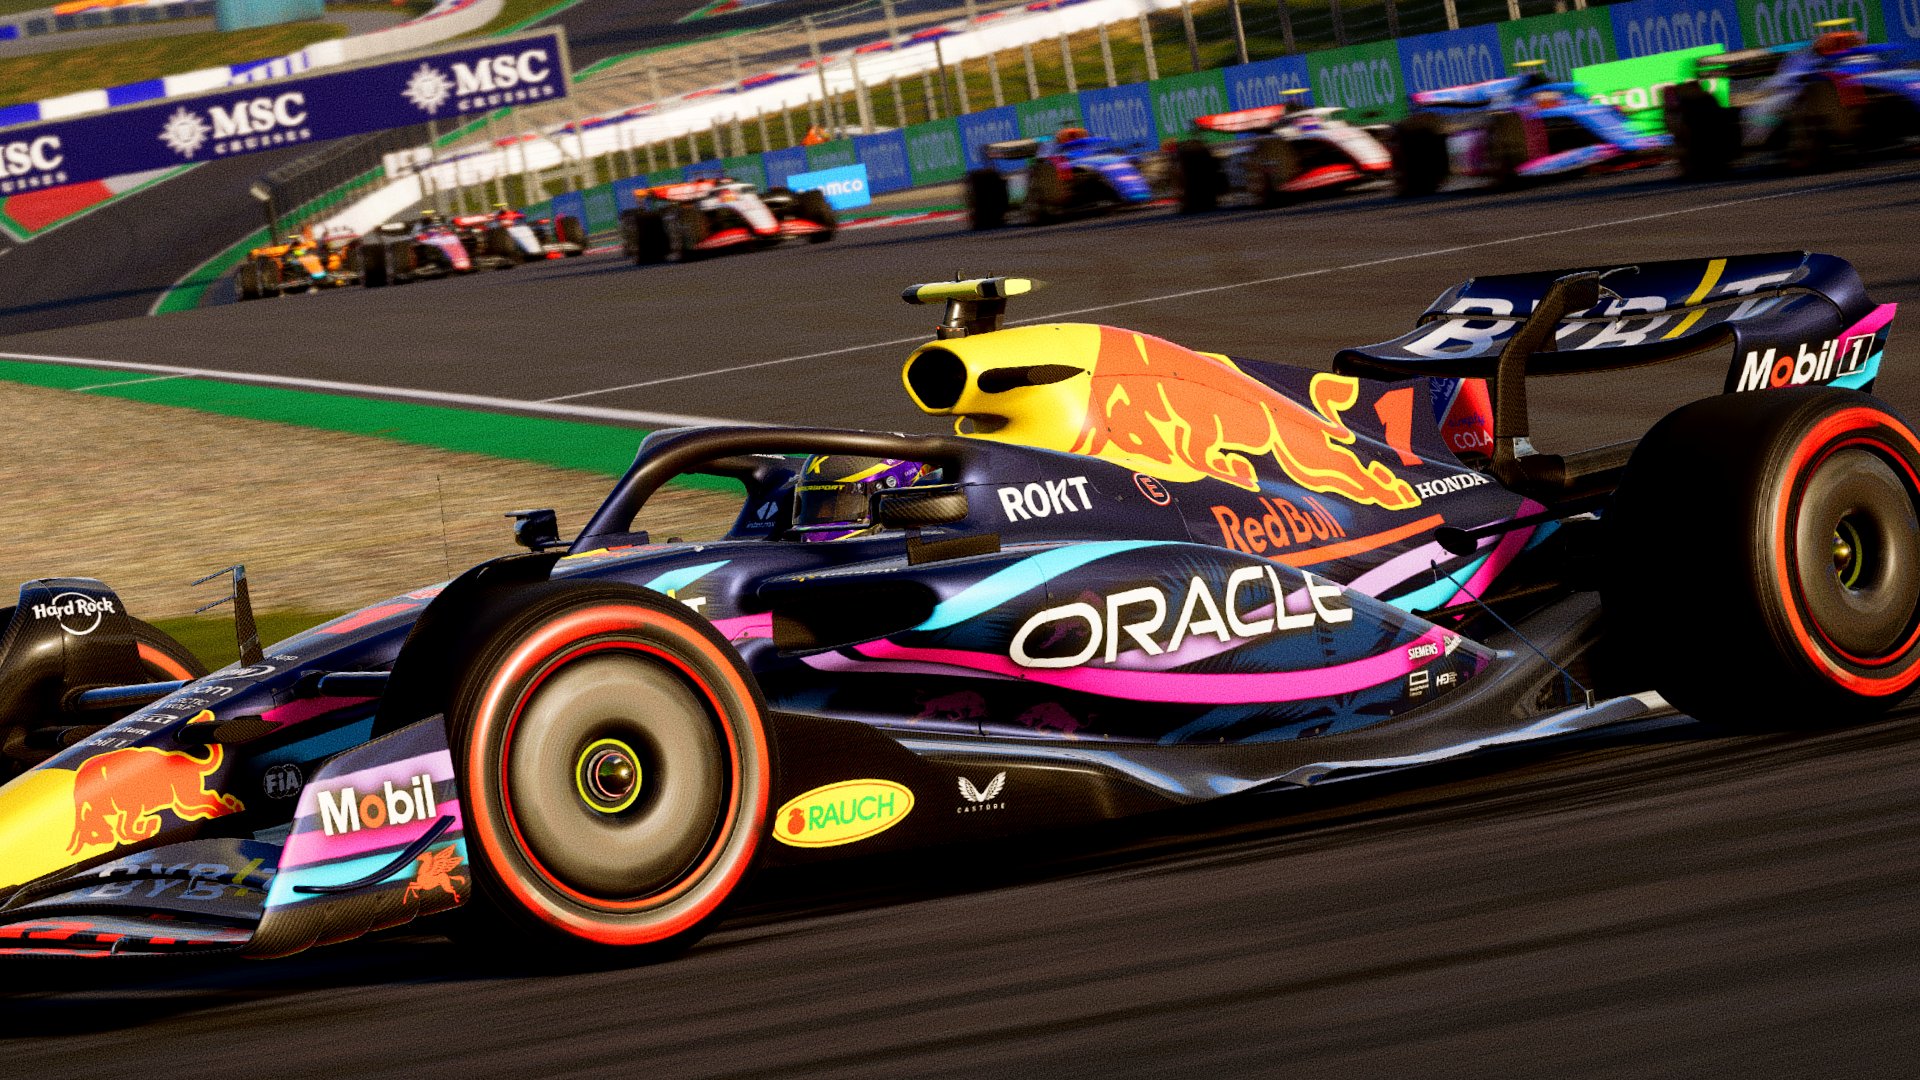 F1 23 ramps up the content to make F1 World worth racing for The Loadout